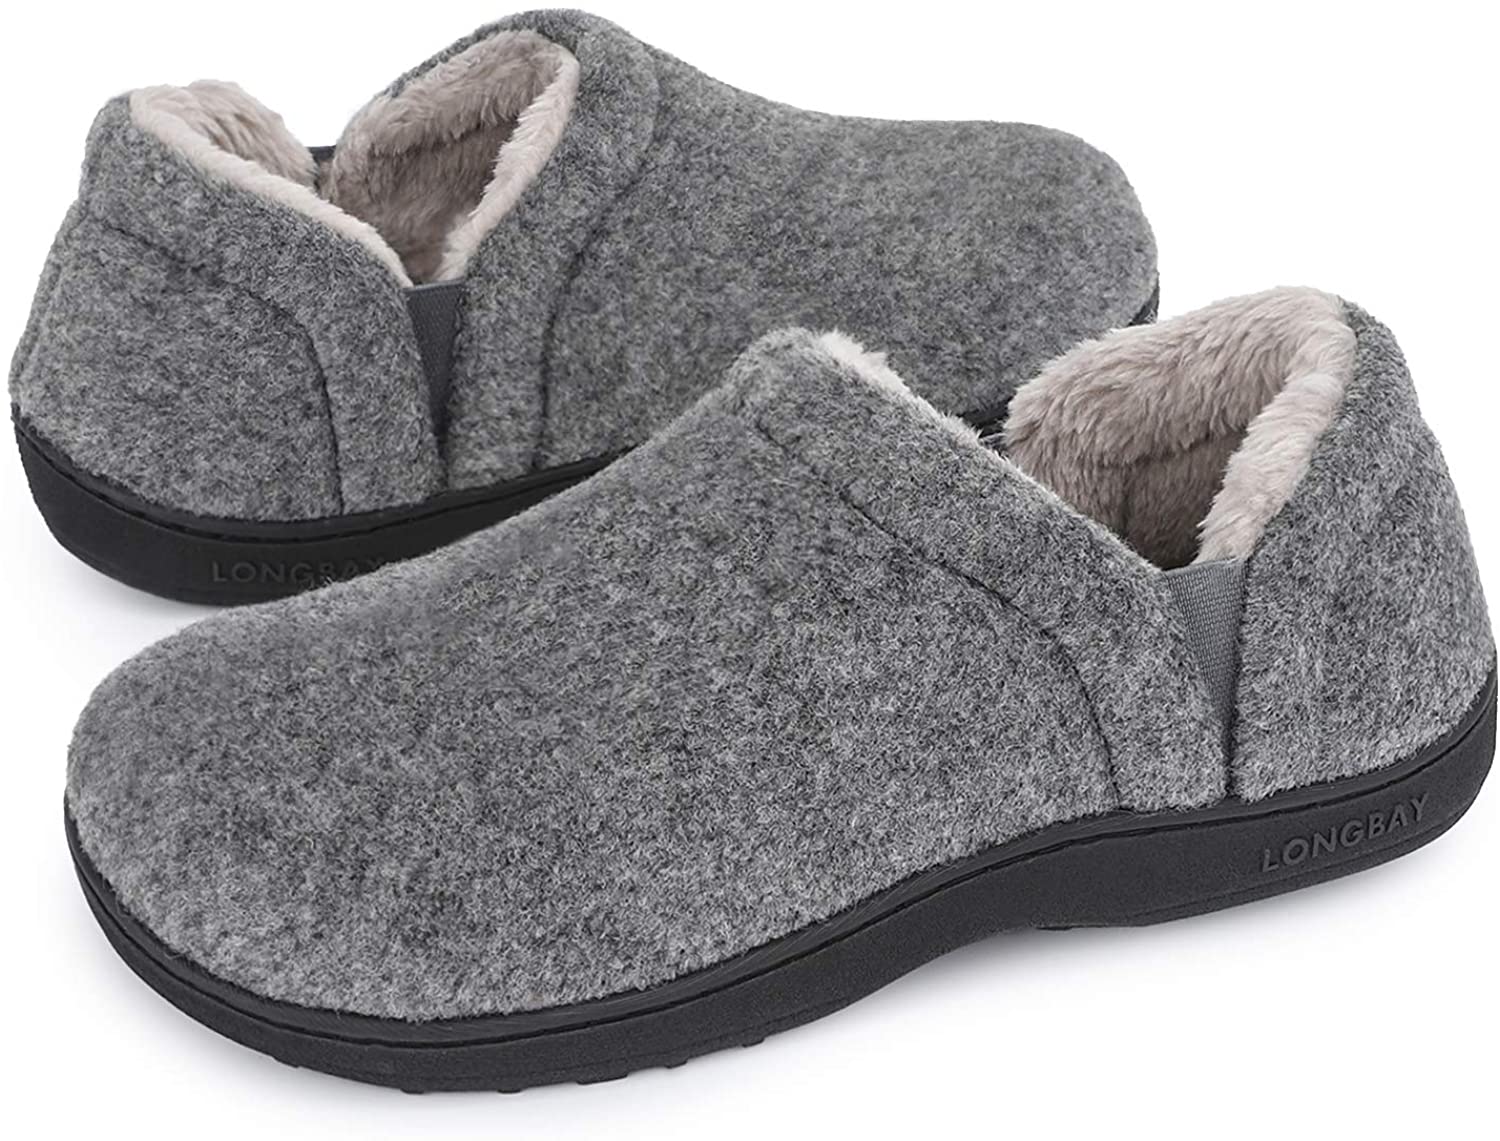 LongBay Mens Cozy Memory Foam Slippers Anti-Slip Faux Fur Comfy House Shoes with Adjustable Elastic Gores 